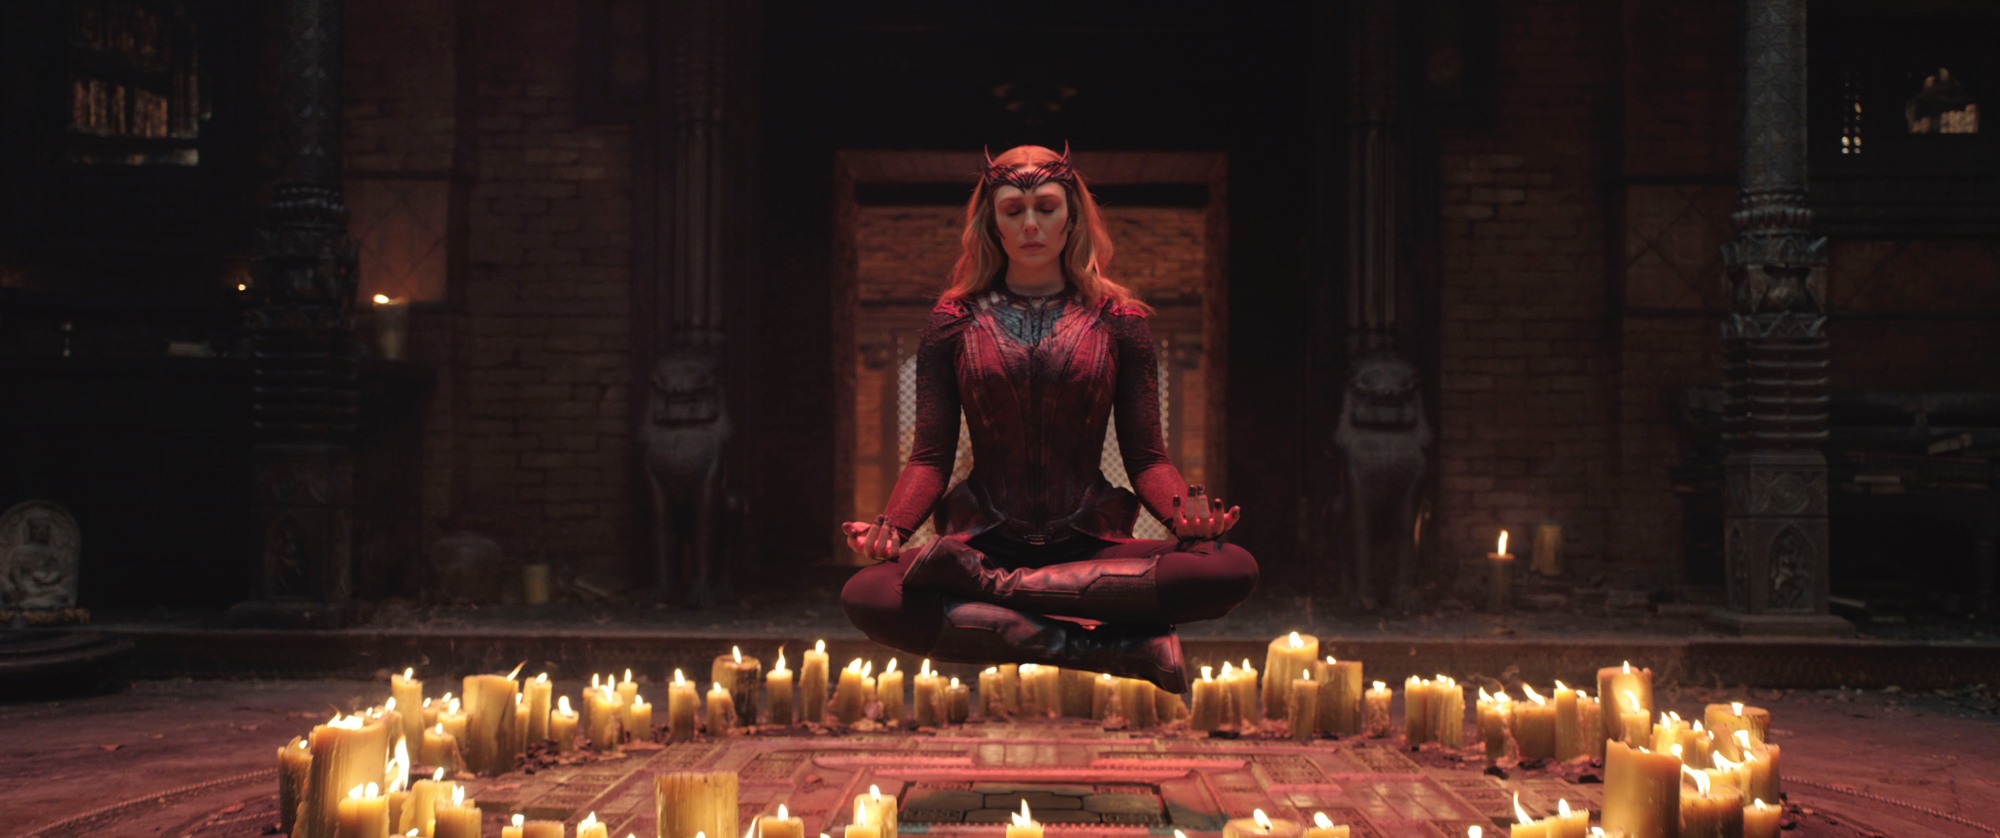 'Doctor Strange in the Multiverse of Madness' Elizabeth Olsen as Wanda Maximoff:Scarlet Witch levitating off the ground with her eyes closed with candles surrounding her in a circle